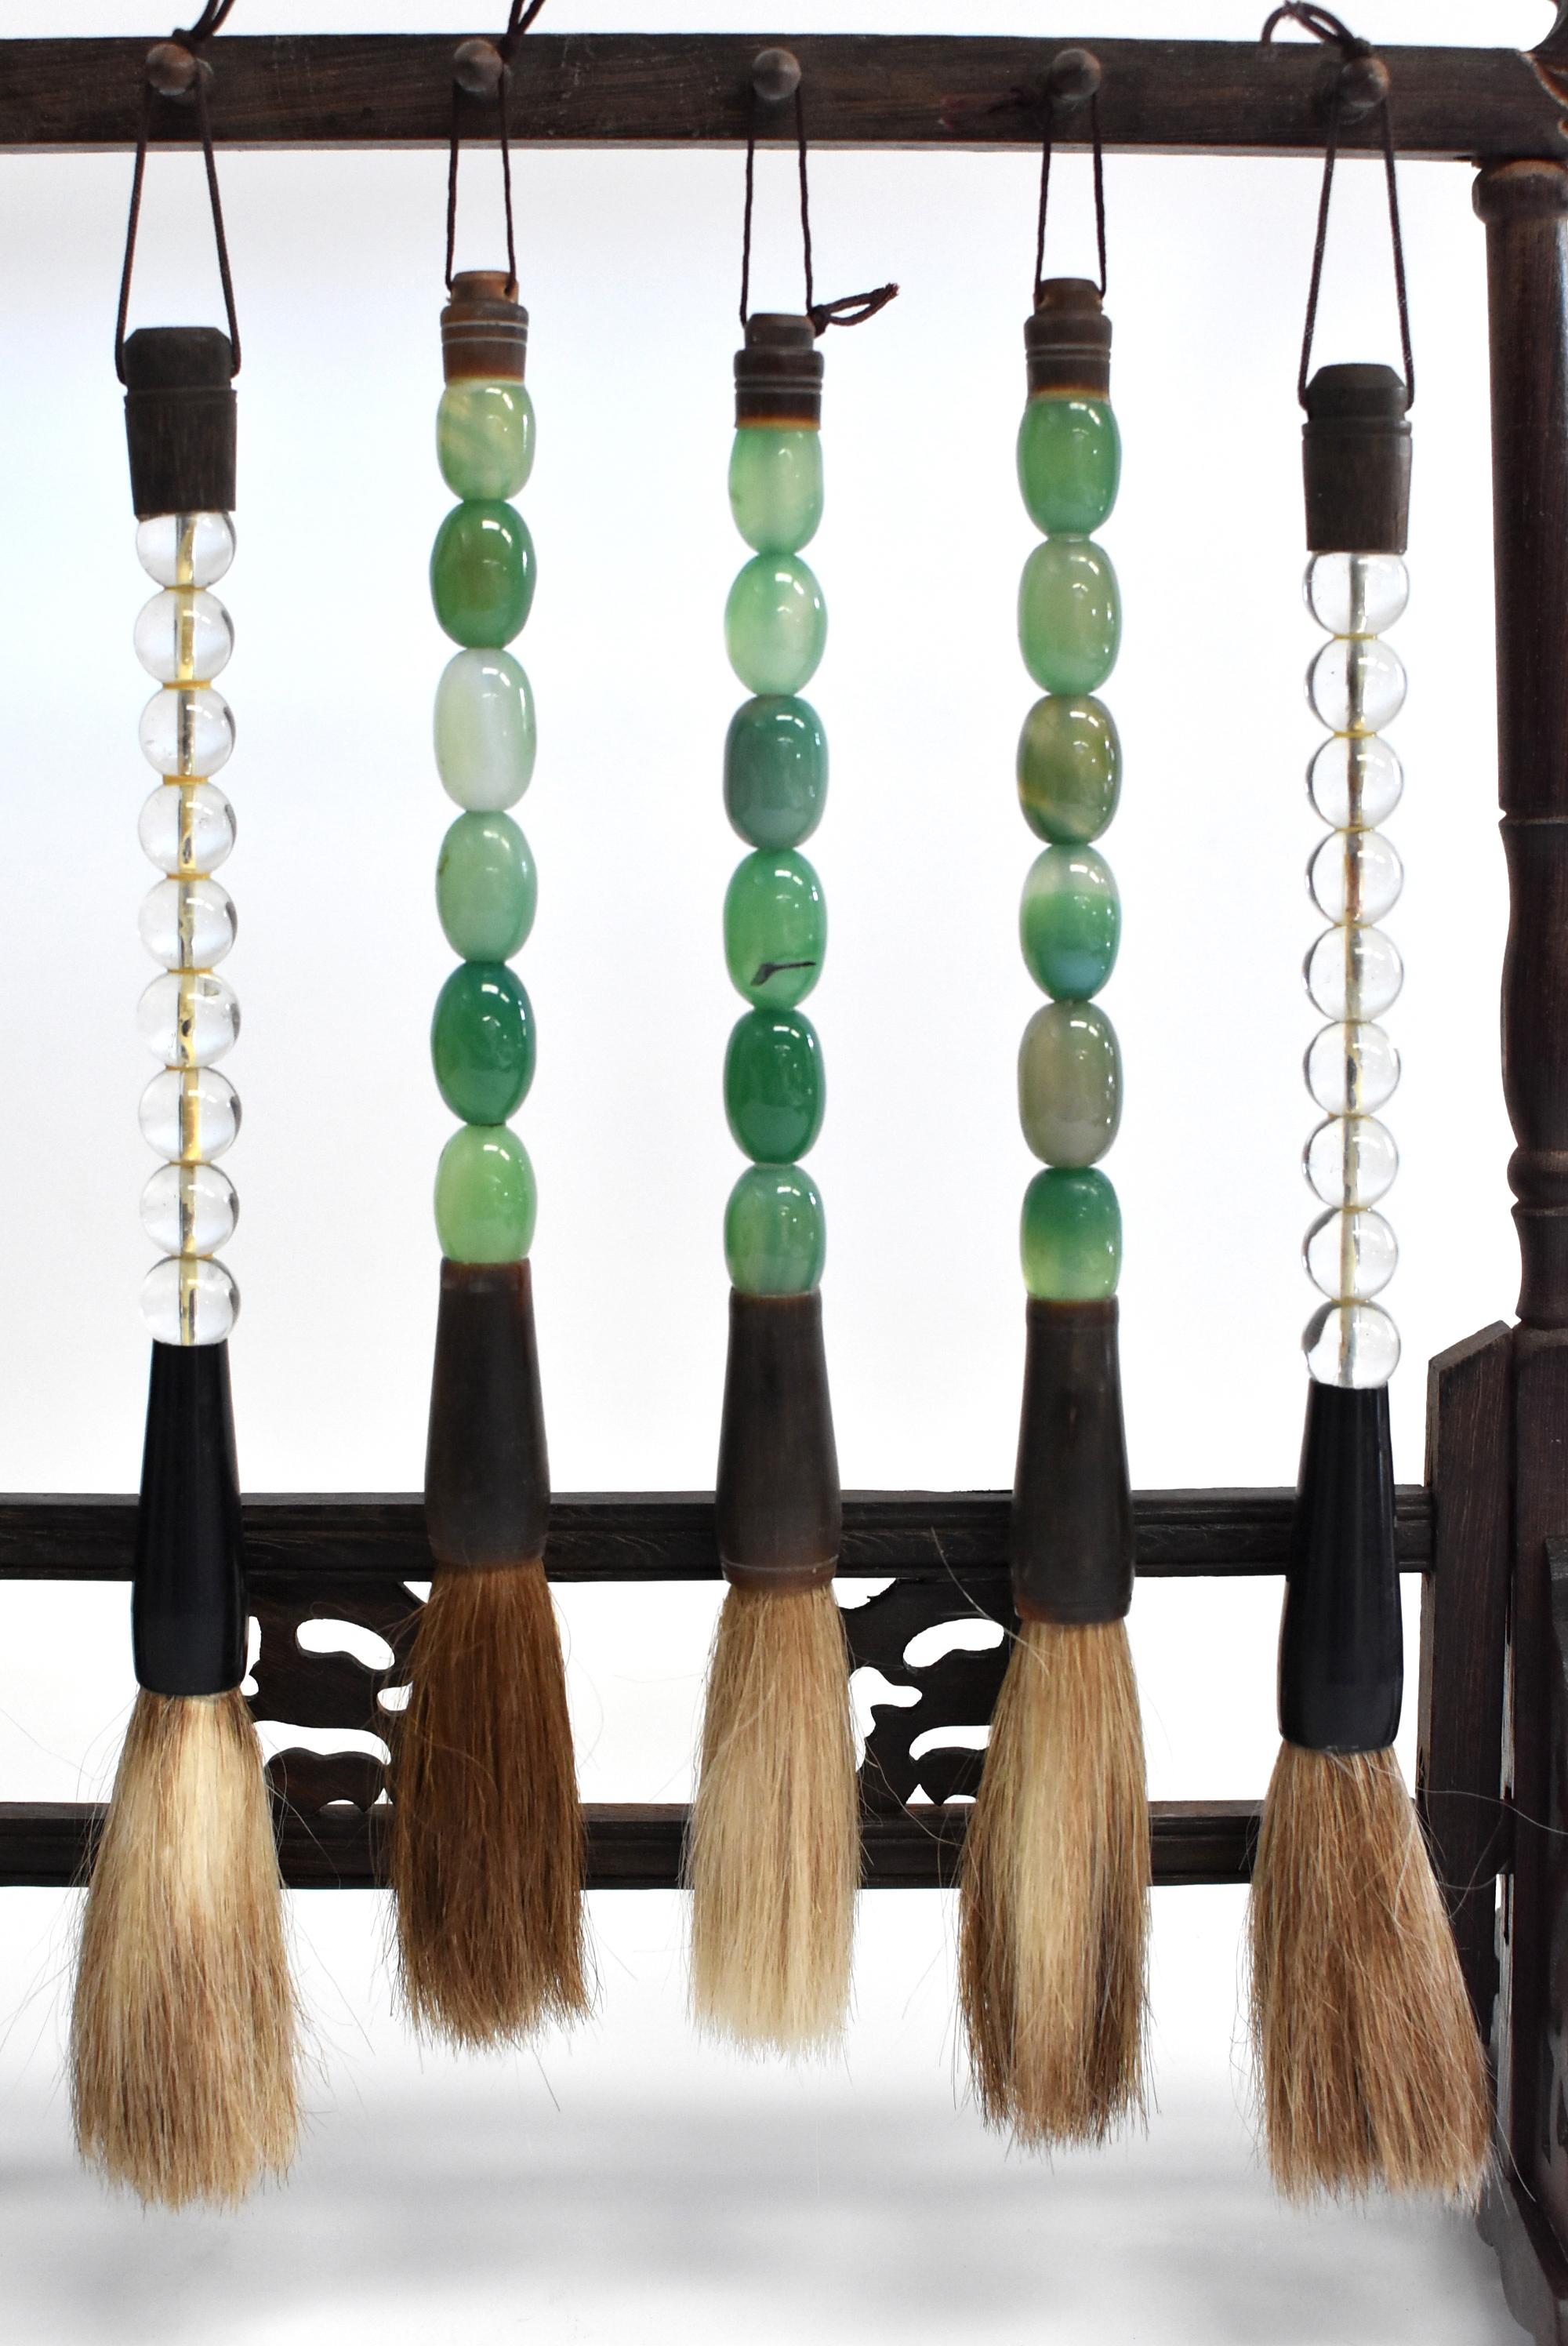 Beautiful set of 5 Chinese calligraphy brushes with glass-bead handles. The green glass brushes have beautiful natural buffalo Horn ferrule. Brushes are handmade with horse hair. Stand not included but available for purchase in our store front.